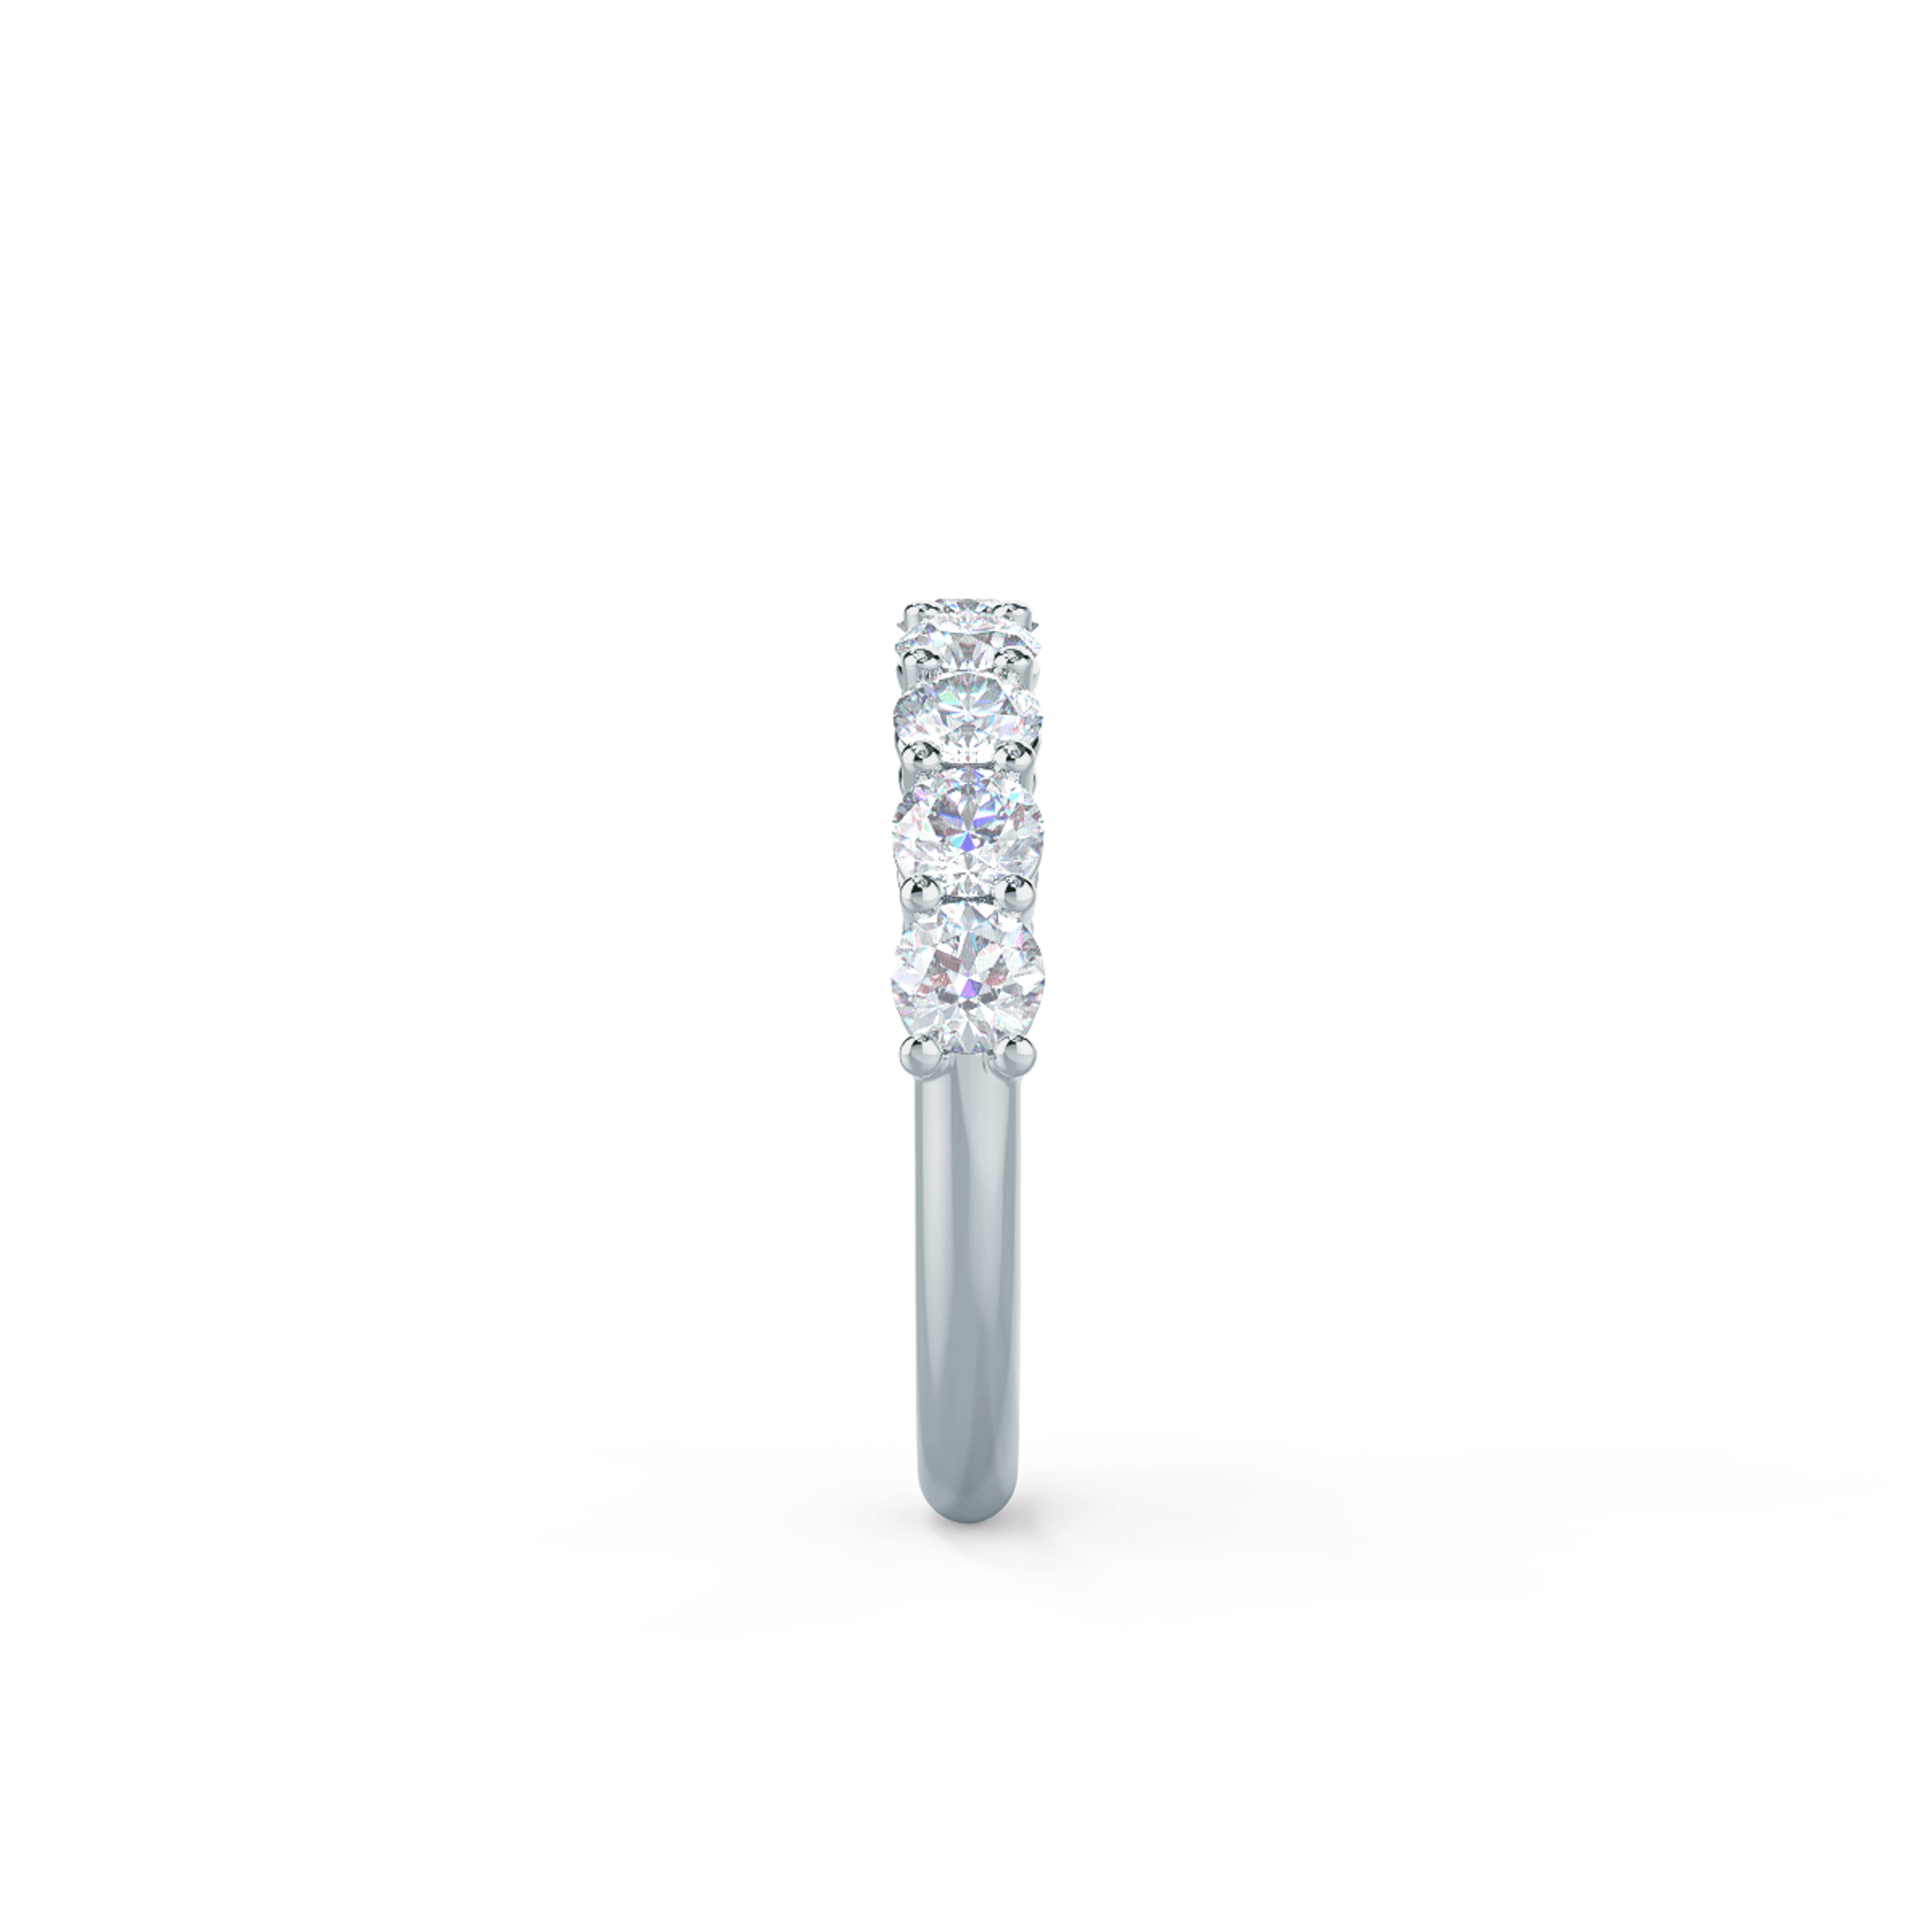 High Quality 1.25 Carat Round Diamonds set in 18k White Gold Prong Set Half Band (Side View)